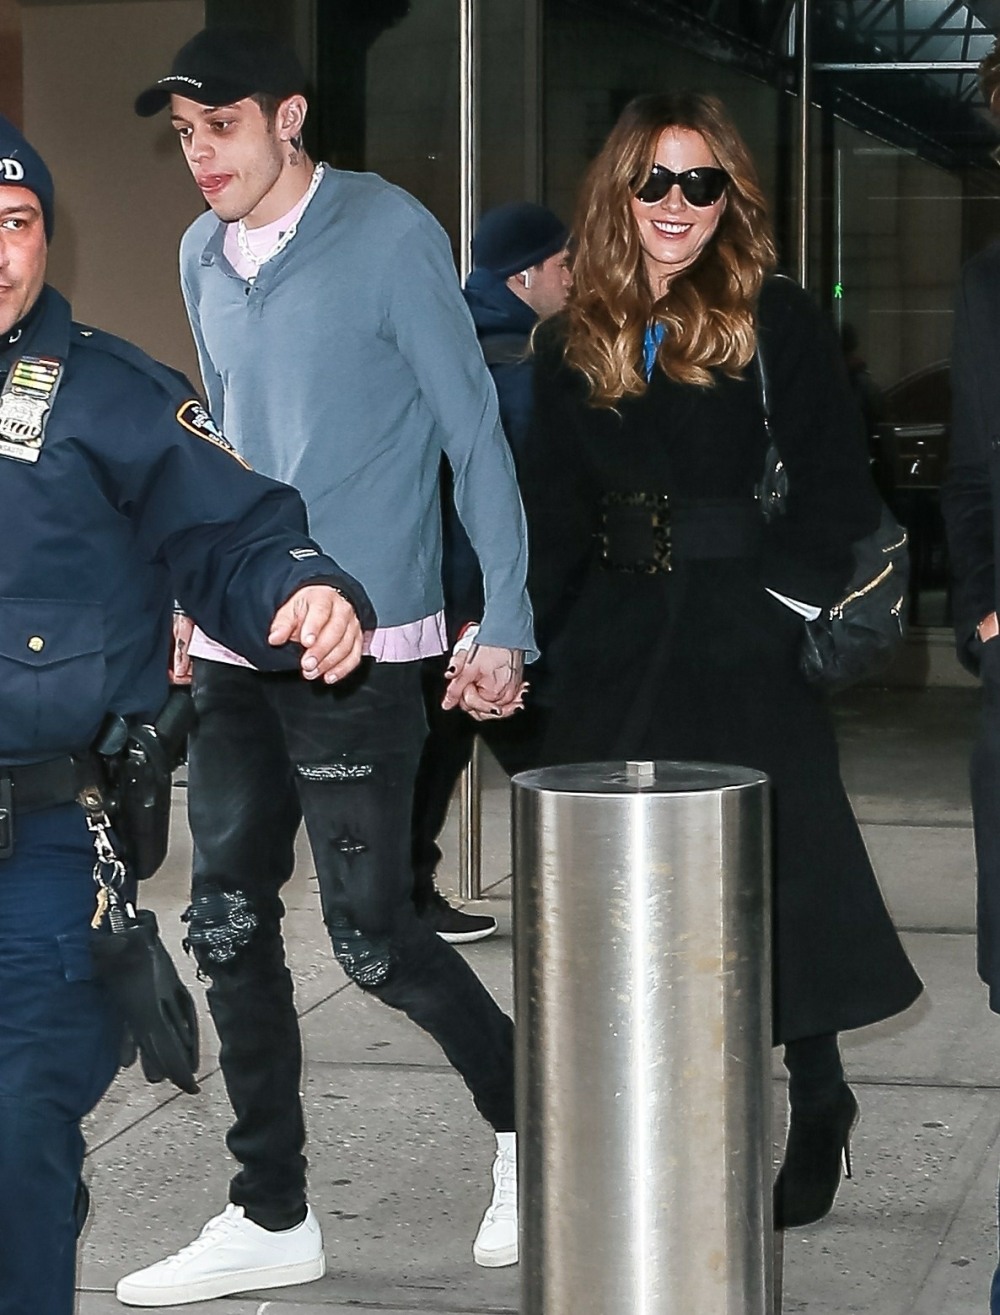 Pete Davidson holds hands while out with girlfriend Kate Beckinsale